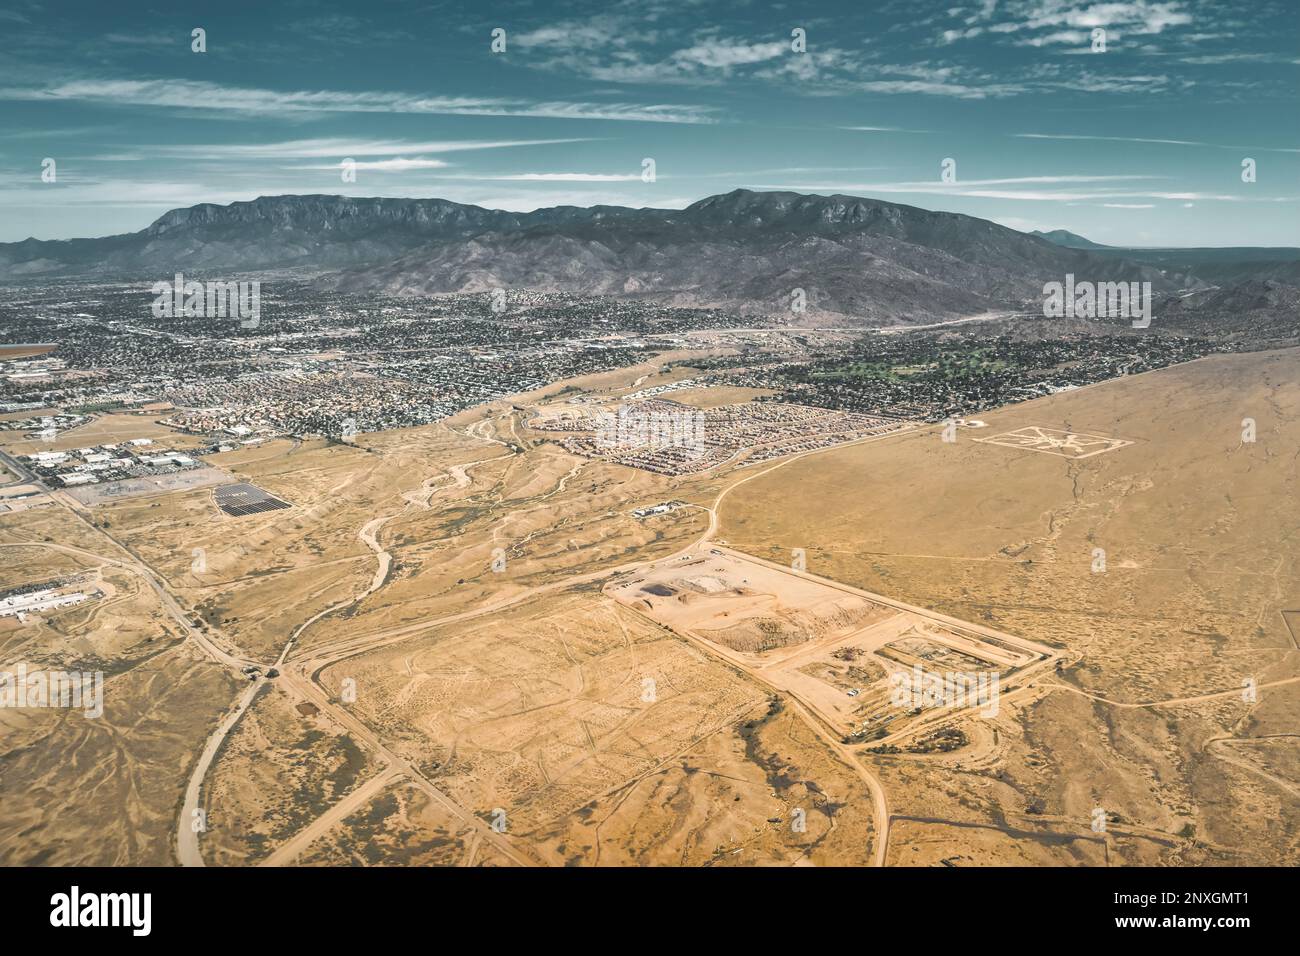 Aerial view of Albuquerque and Sandia Mountains in New Mexico, USA. Stock Photo